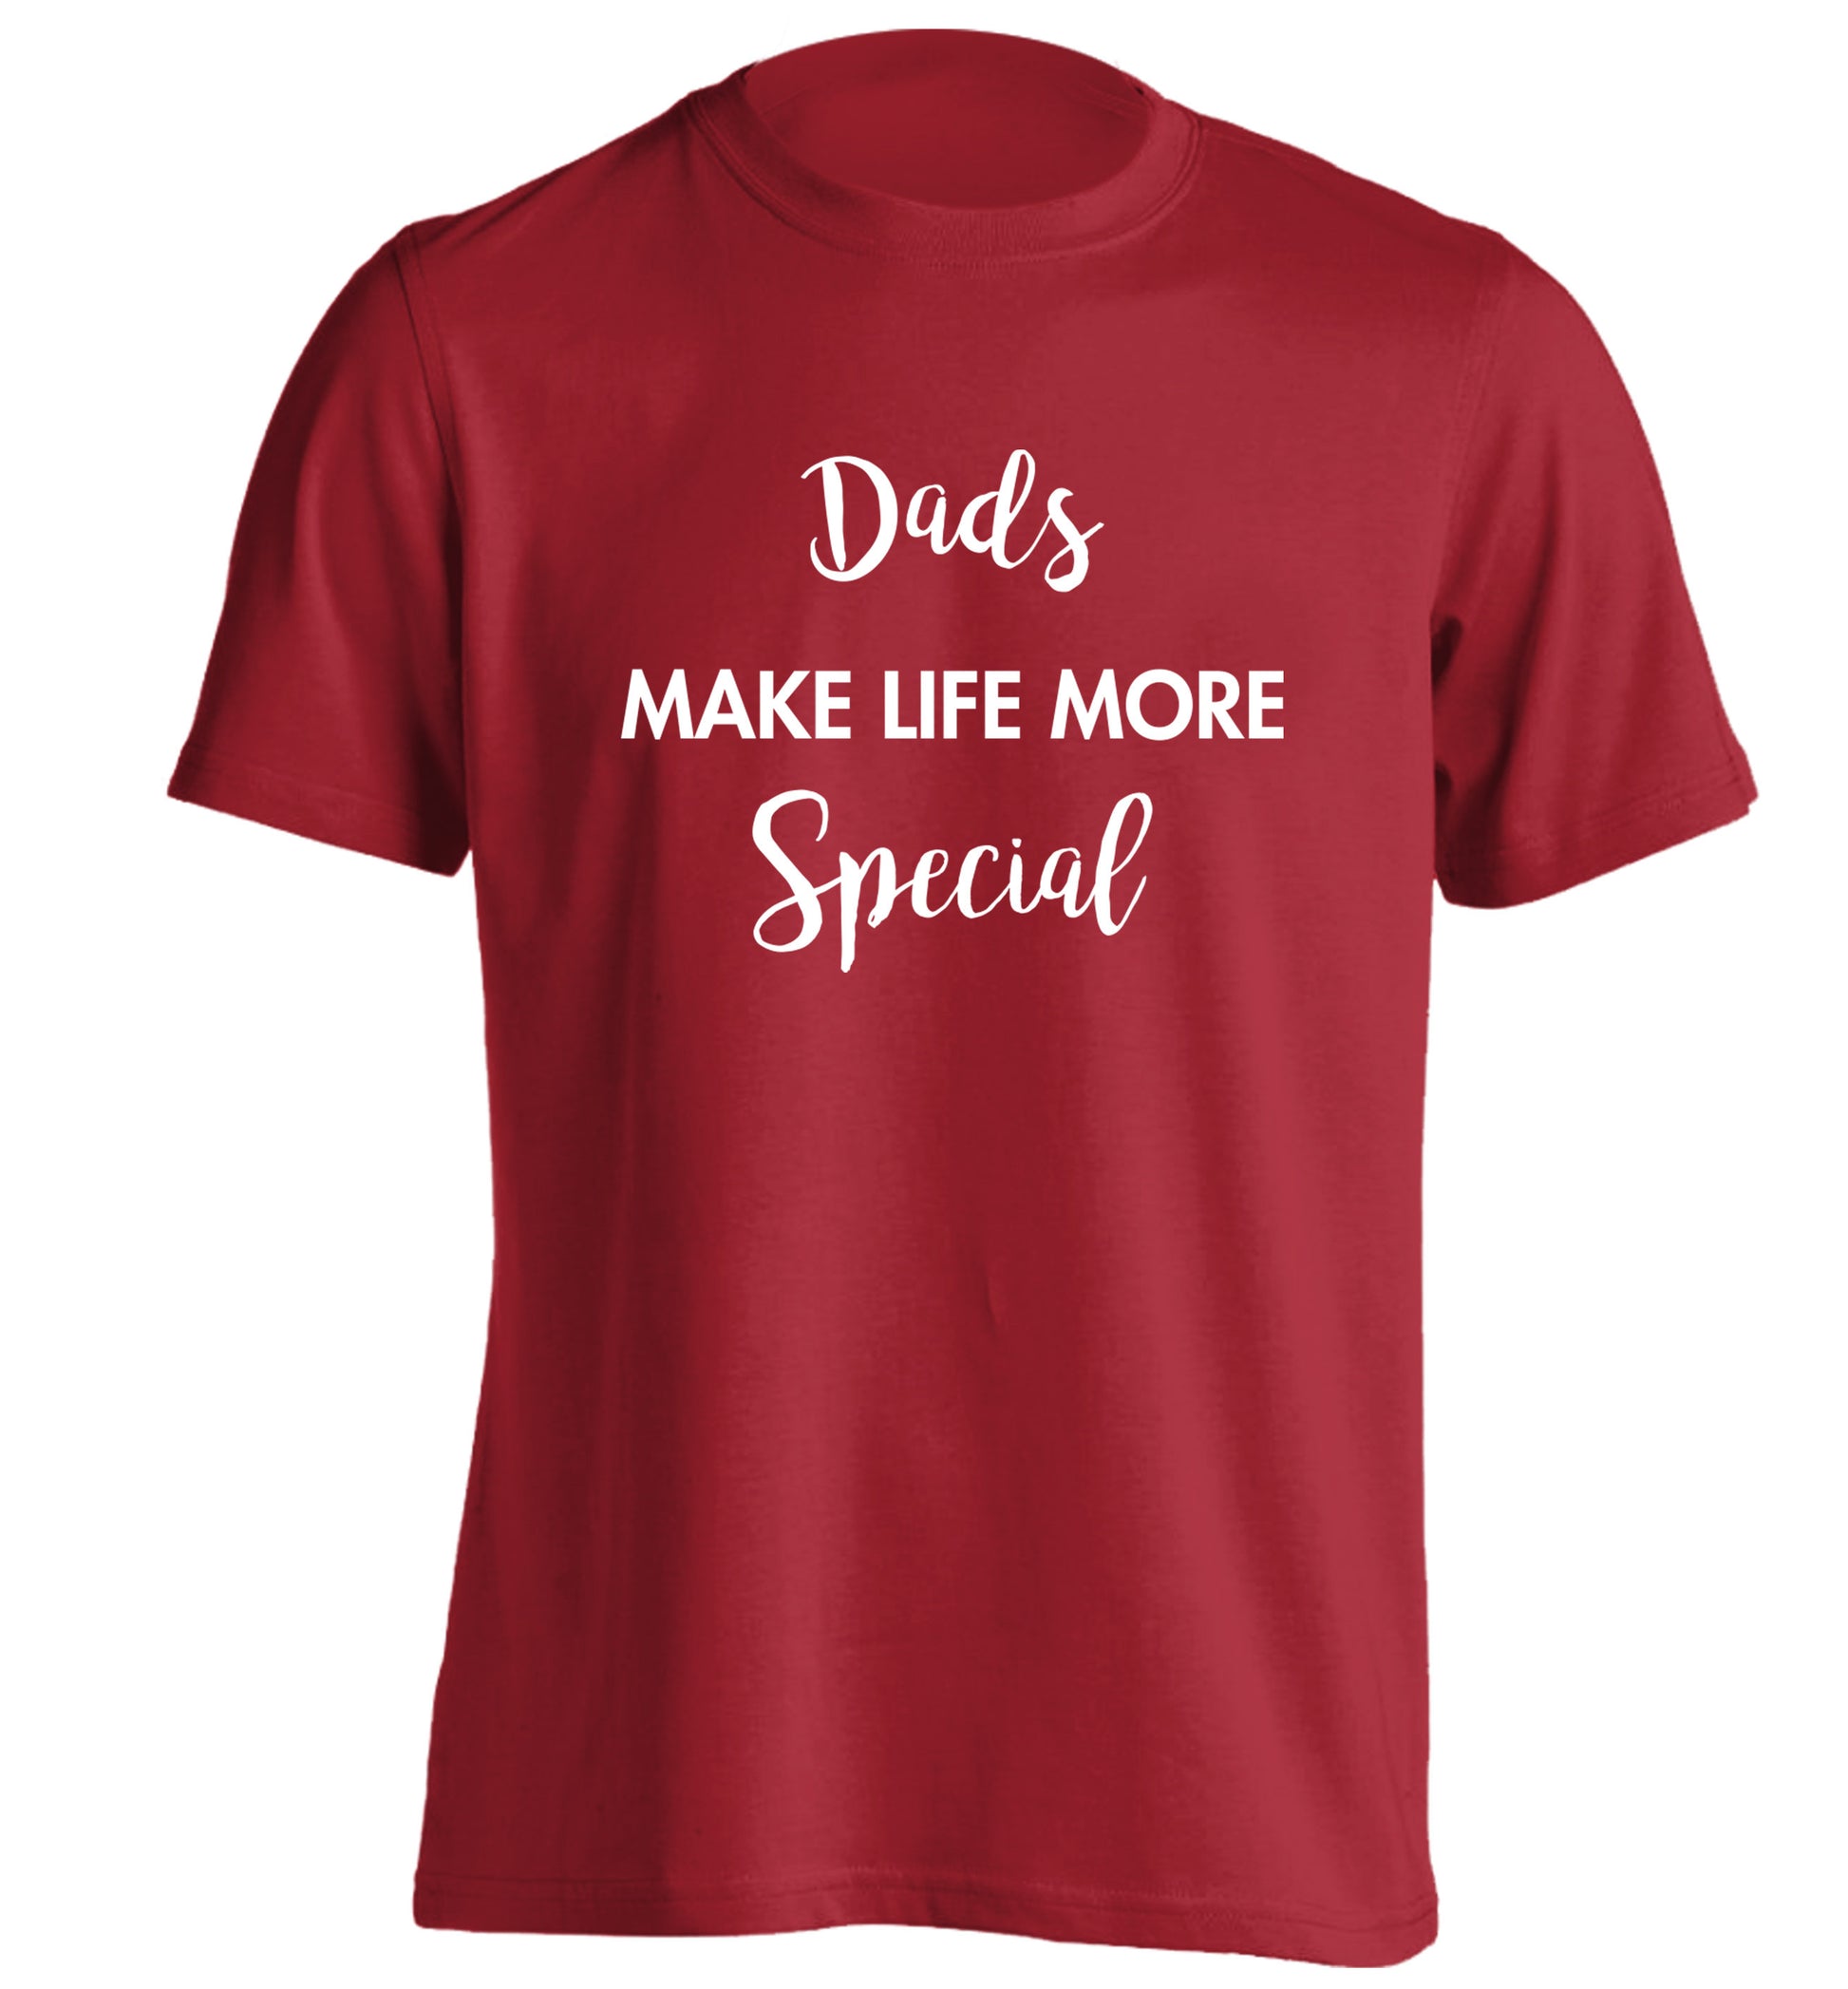 Dads make life more special adults unisex red Tshirt 2XL